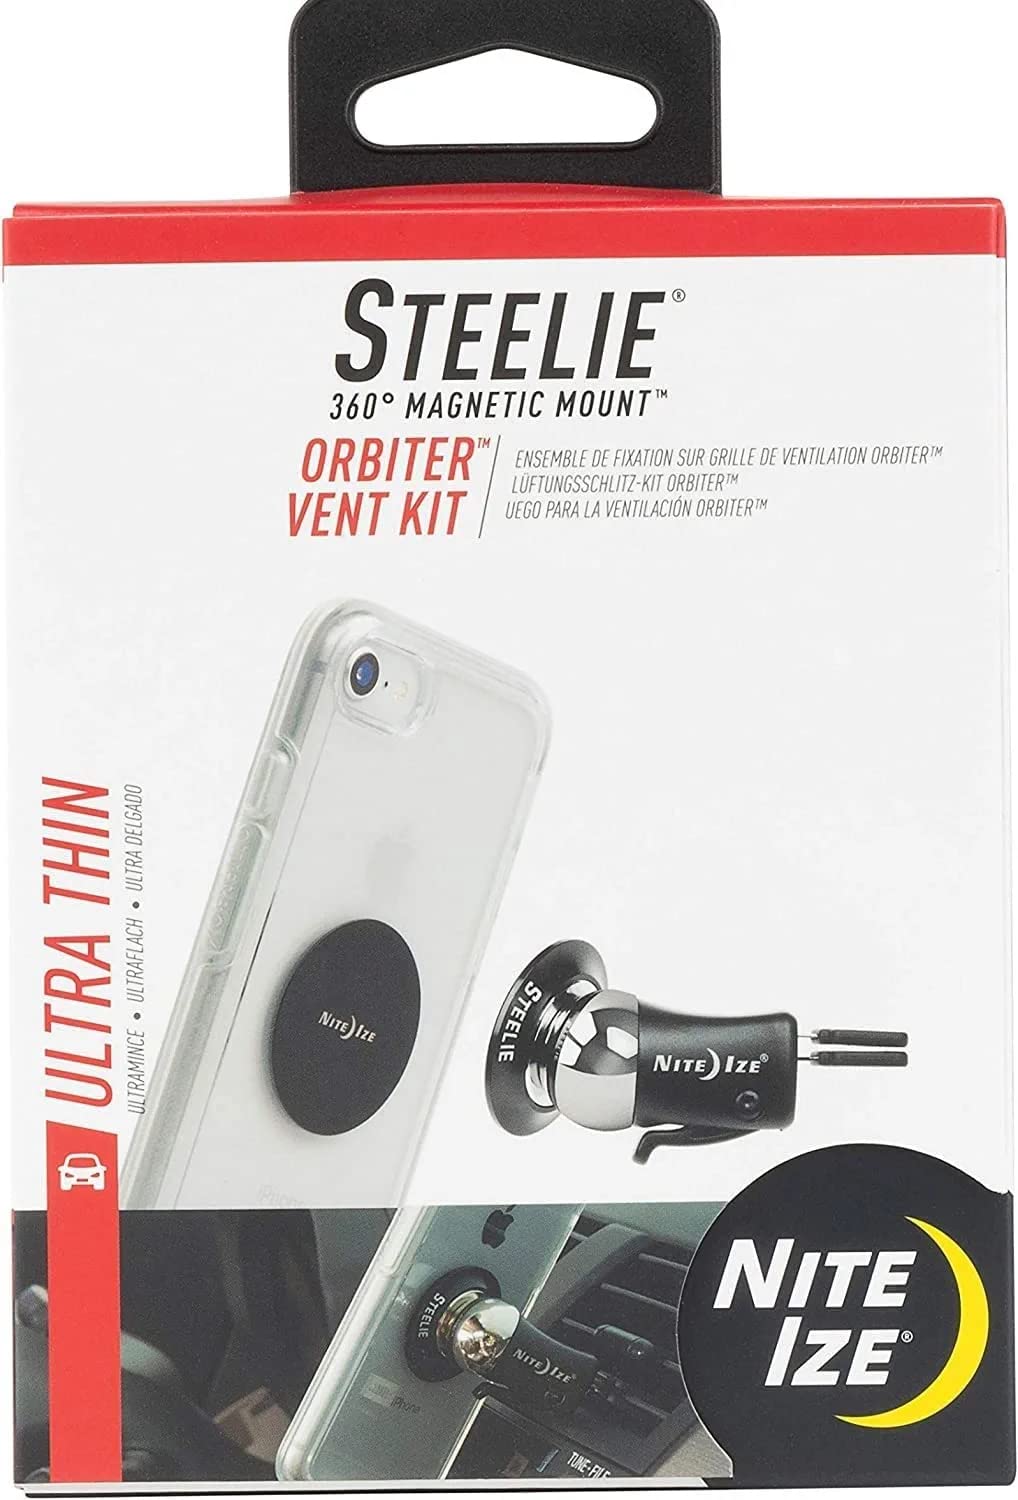 Nite Ize Steelie Orbiter Vent Mount Kit - Portable Magnetic Cell Phone Holder for Car Vent, Low profile, No attached Magnets